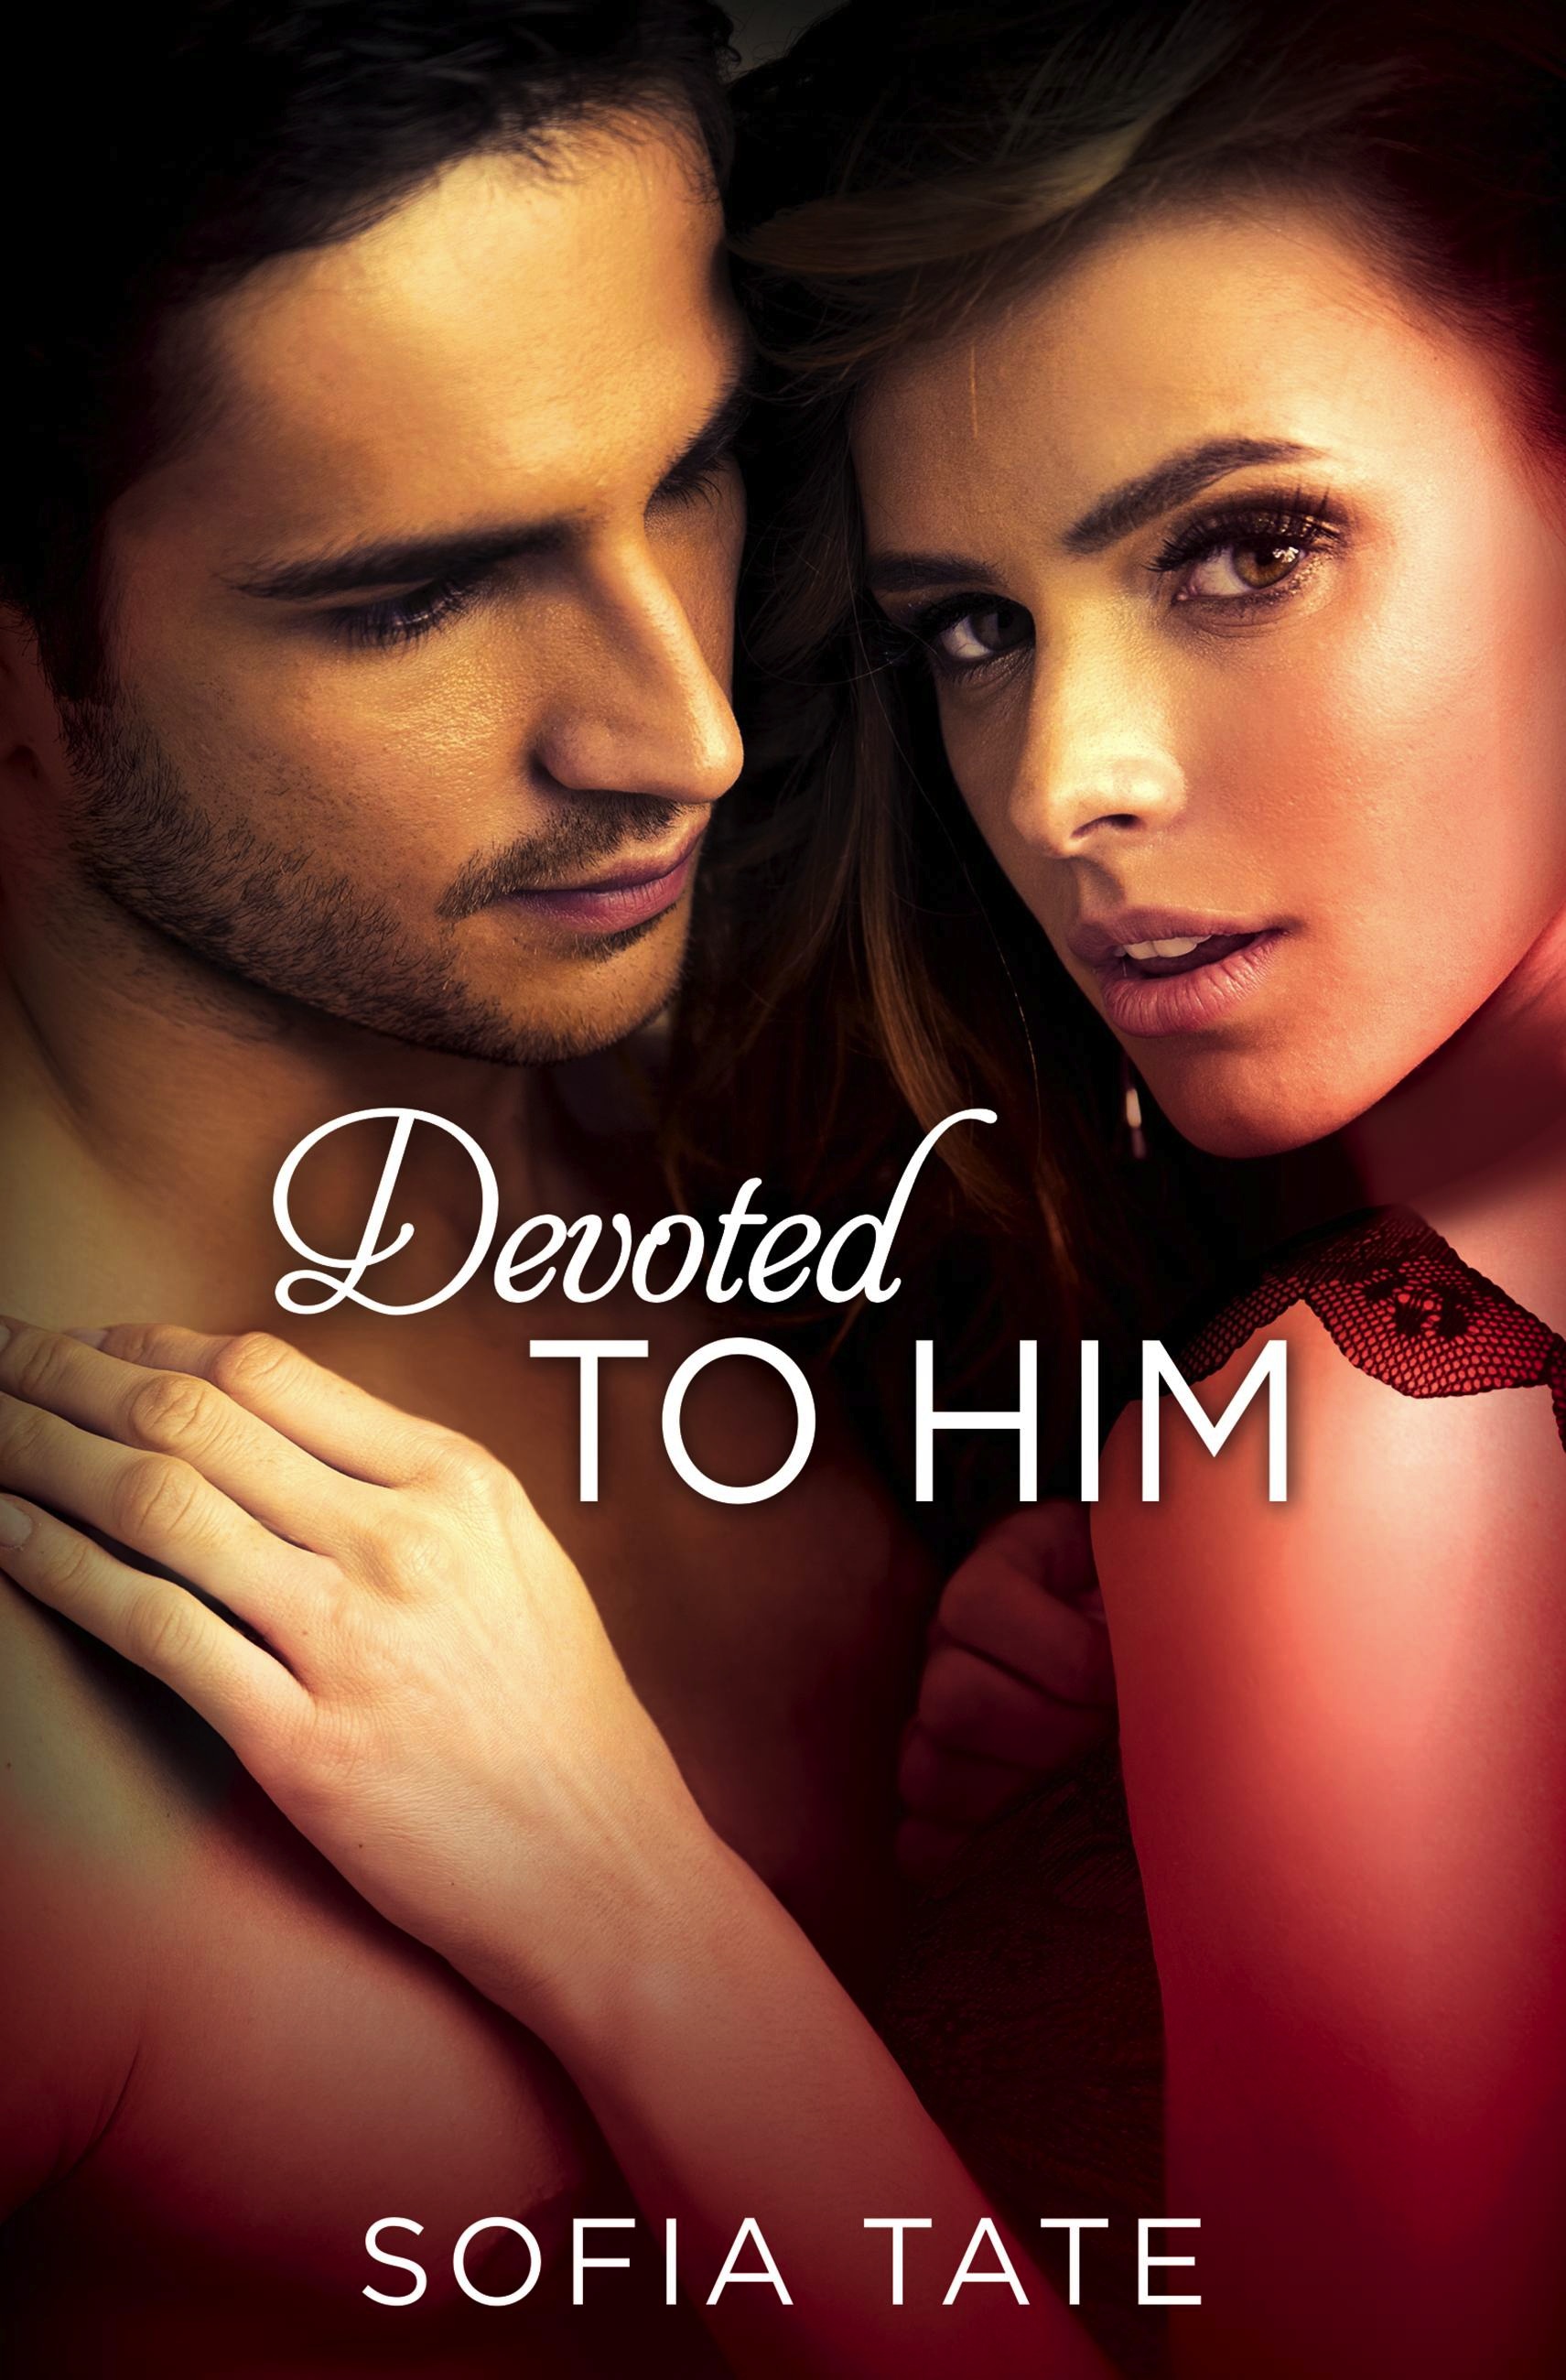 Devoted to Him by Sofia Tate | Hachette Book Group